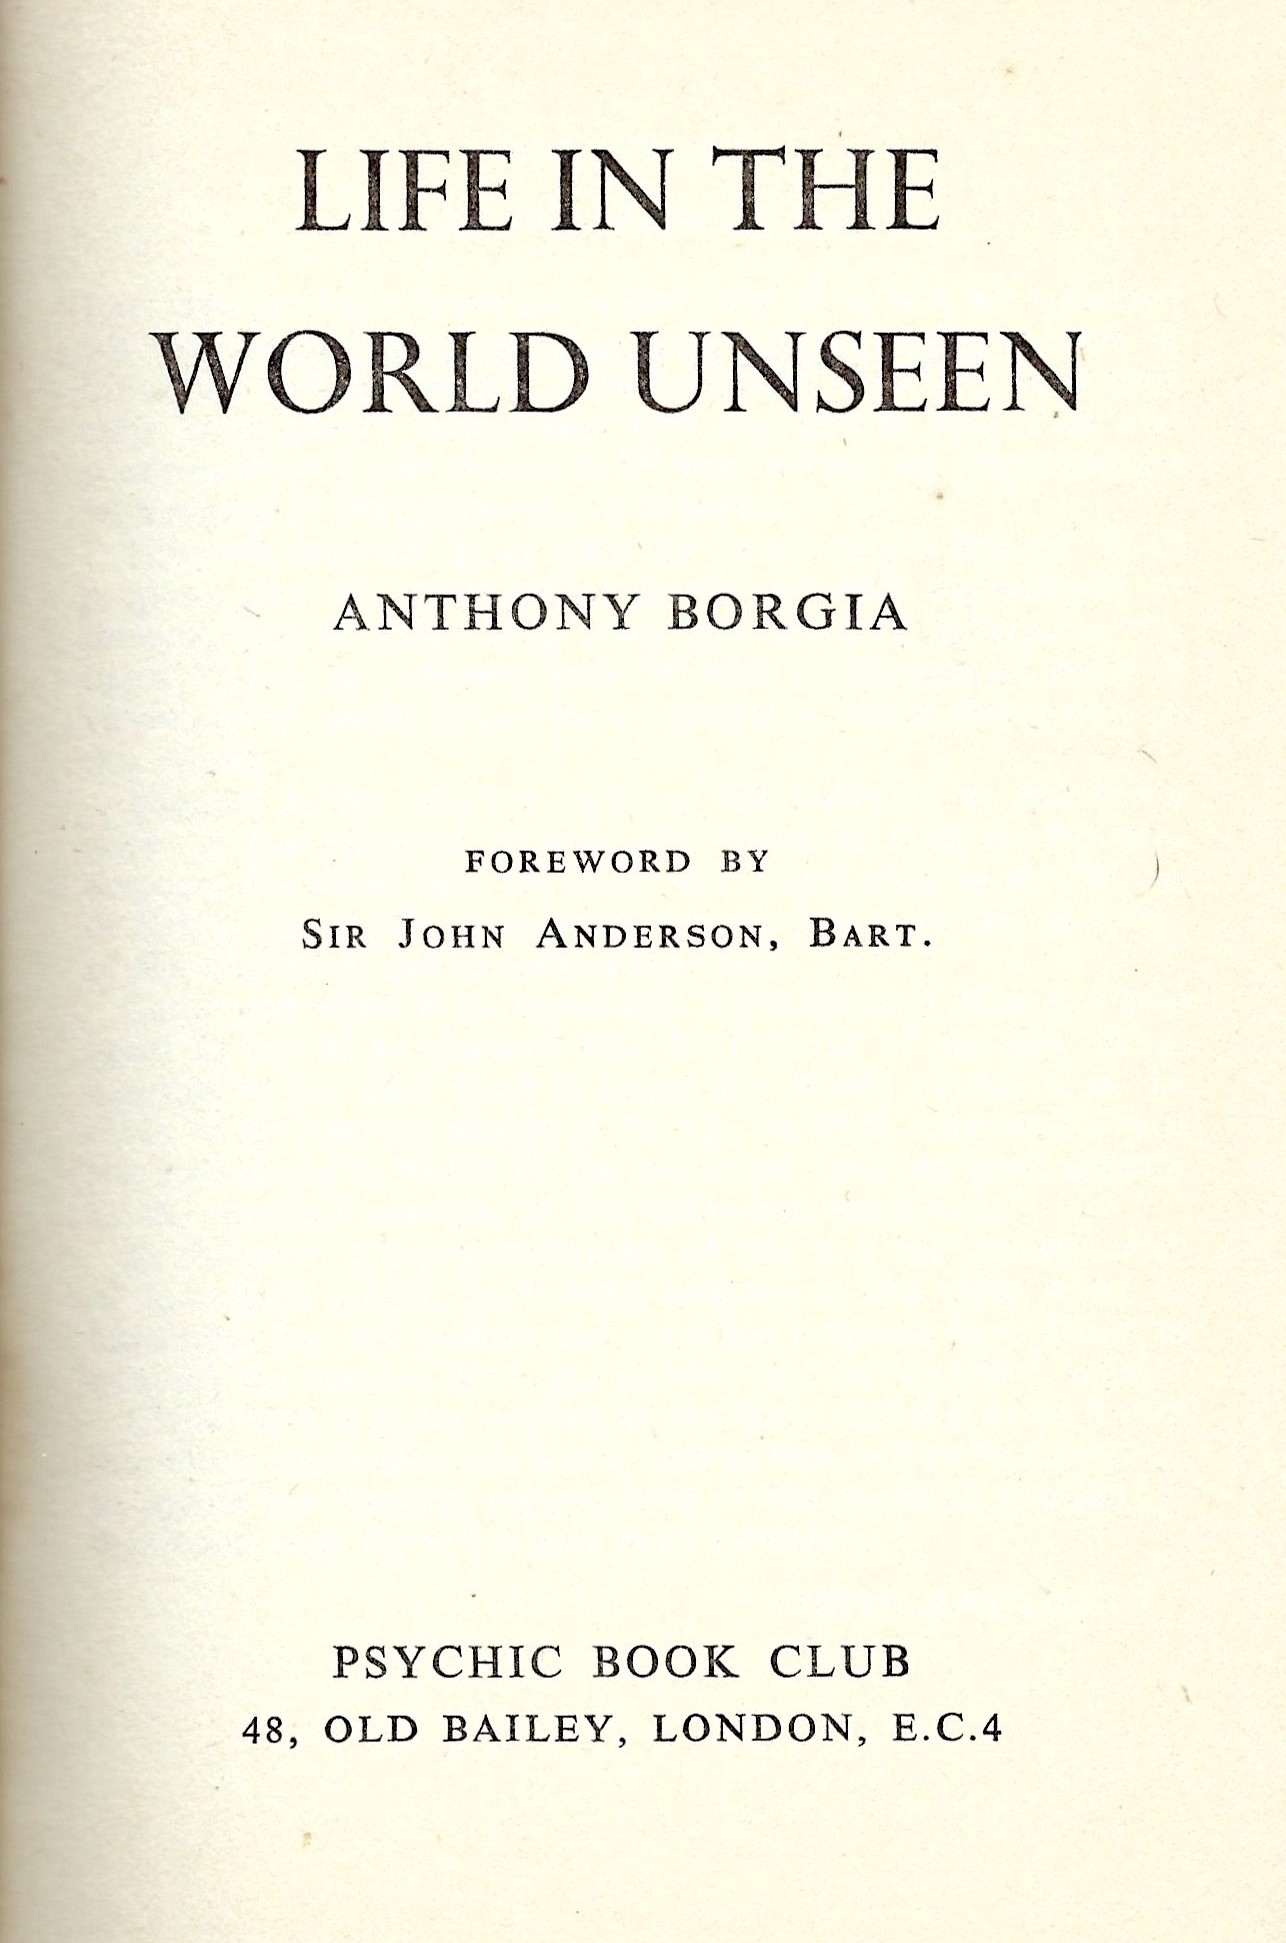 04512861943667-life-in-the-world-unseen---anthony-borgia.jpeg